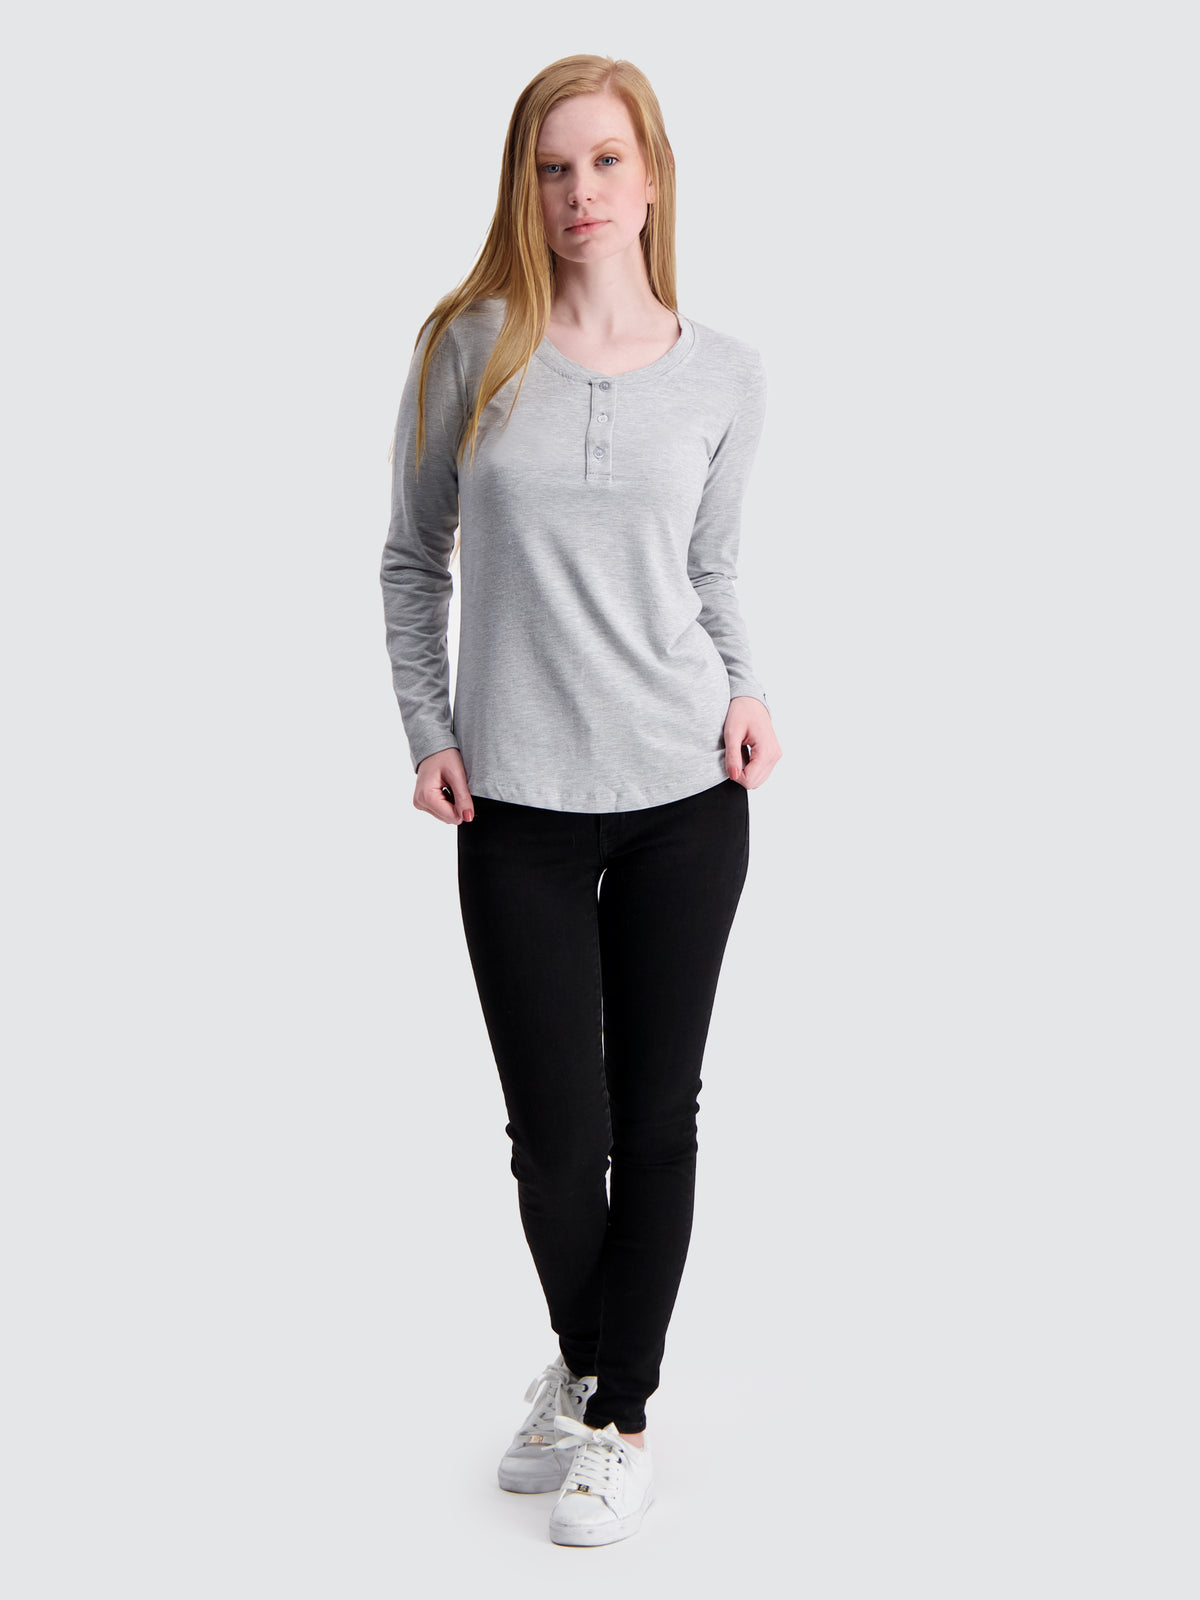 Two Blind Brothers - Womens Women's Long Sleeve Relaxed Fit Henley Light-Grey